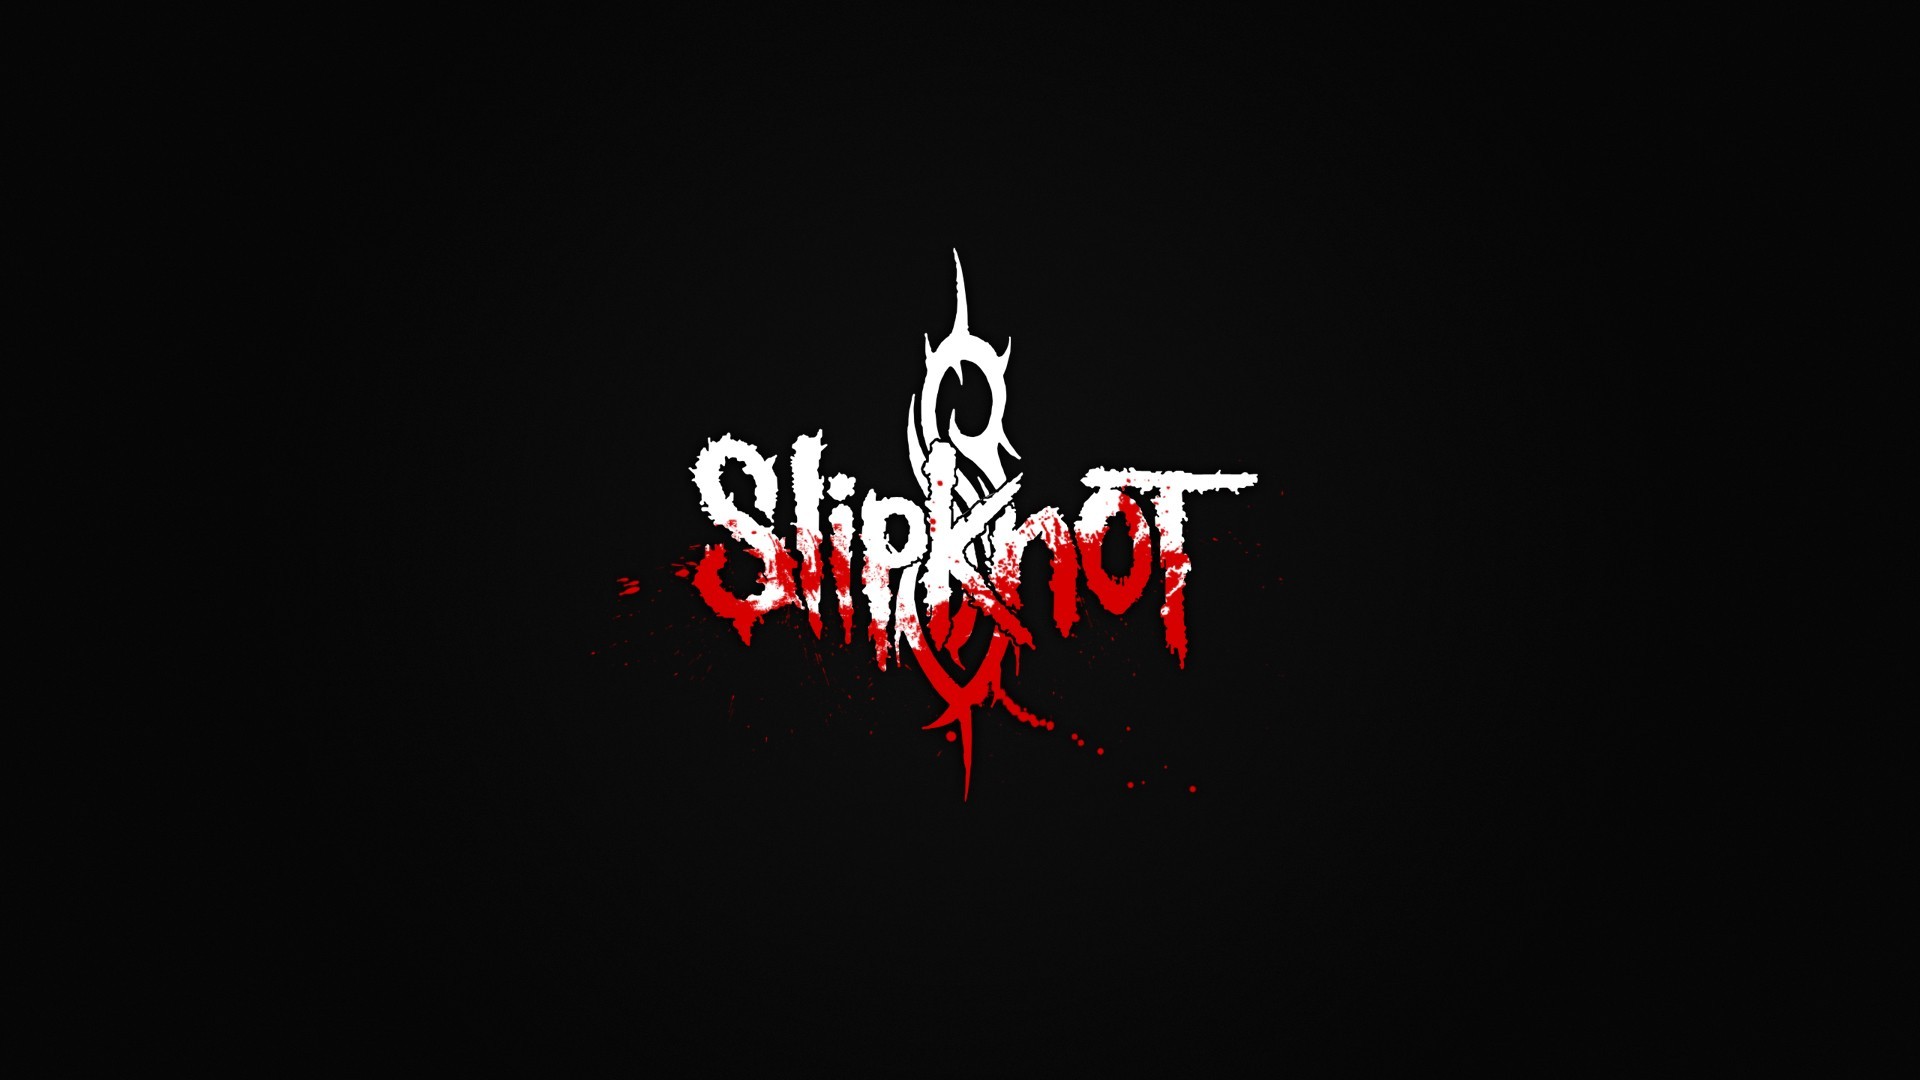 Slipknot Wallpapers, Pictures, Images